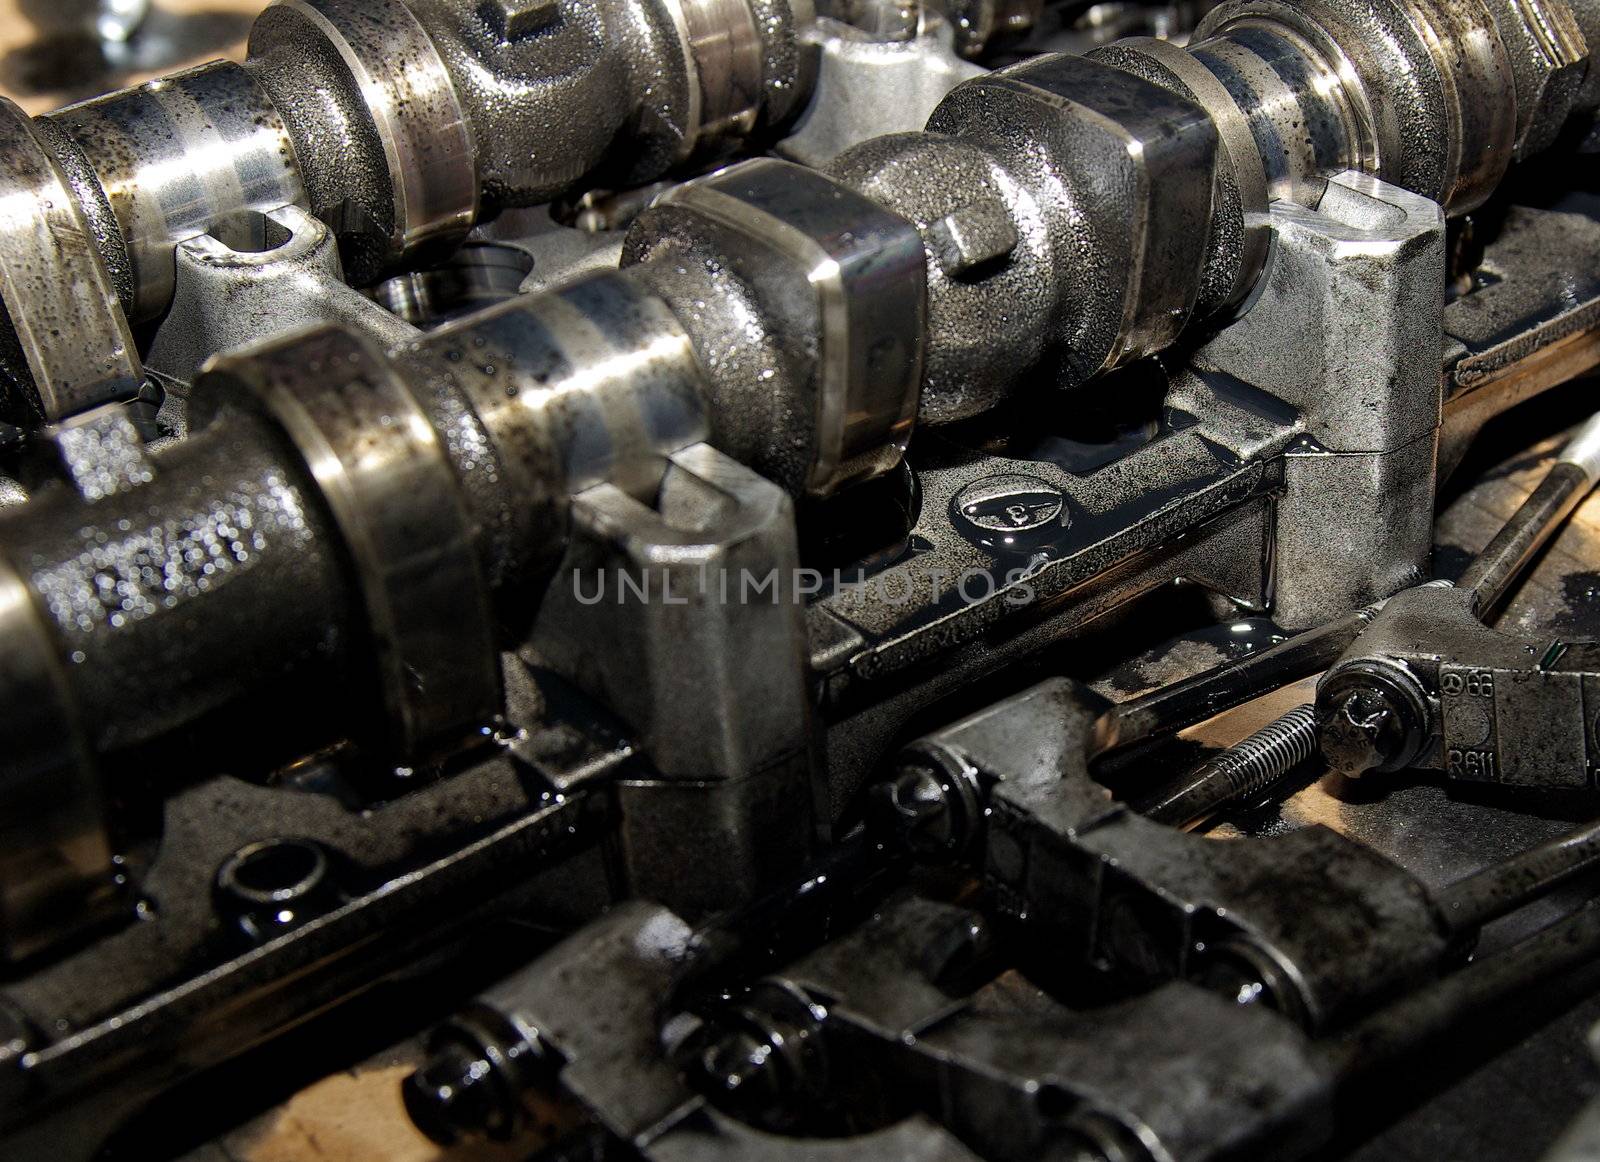 Camshaft of a truck